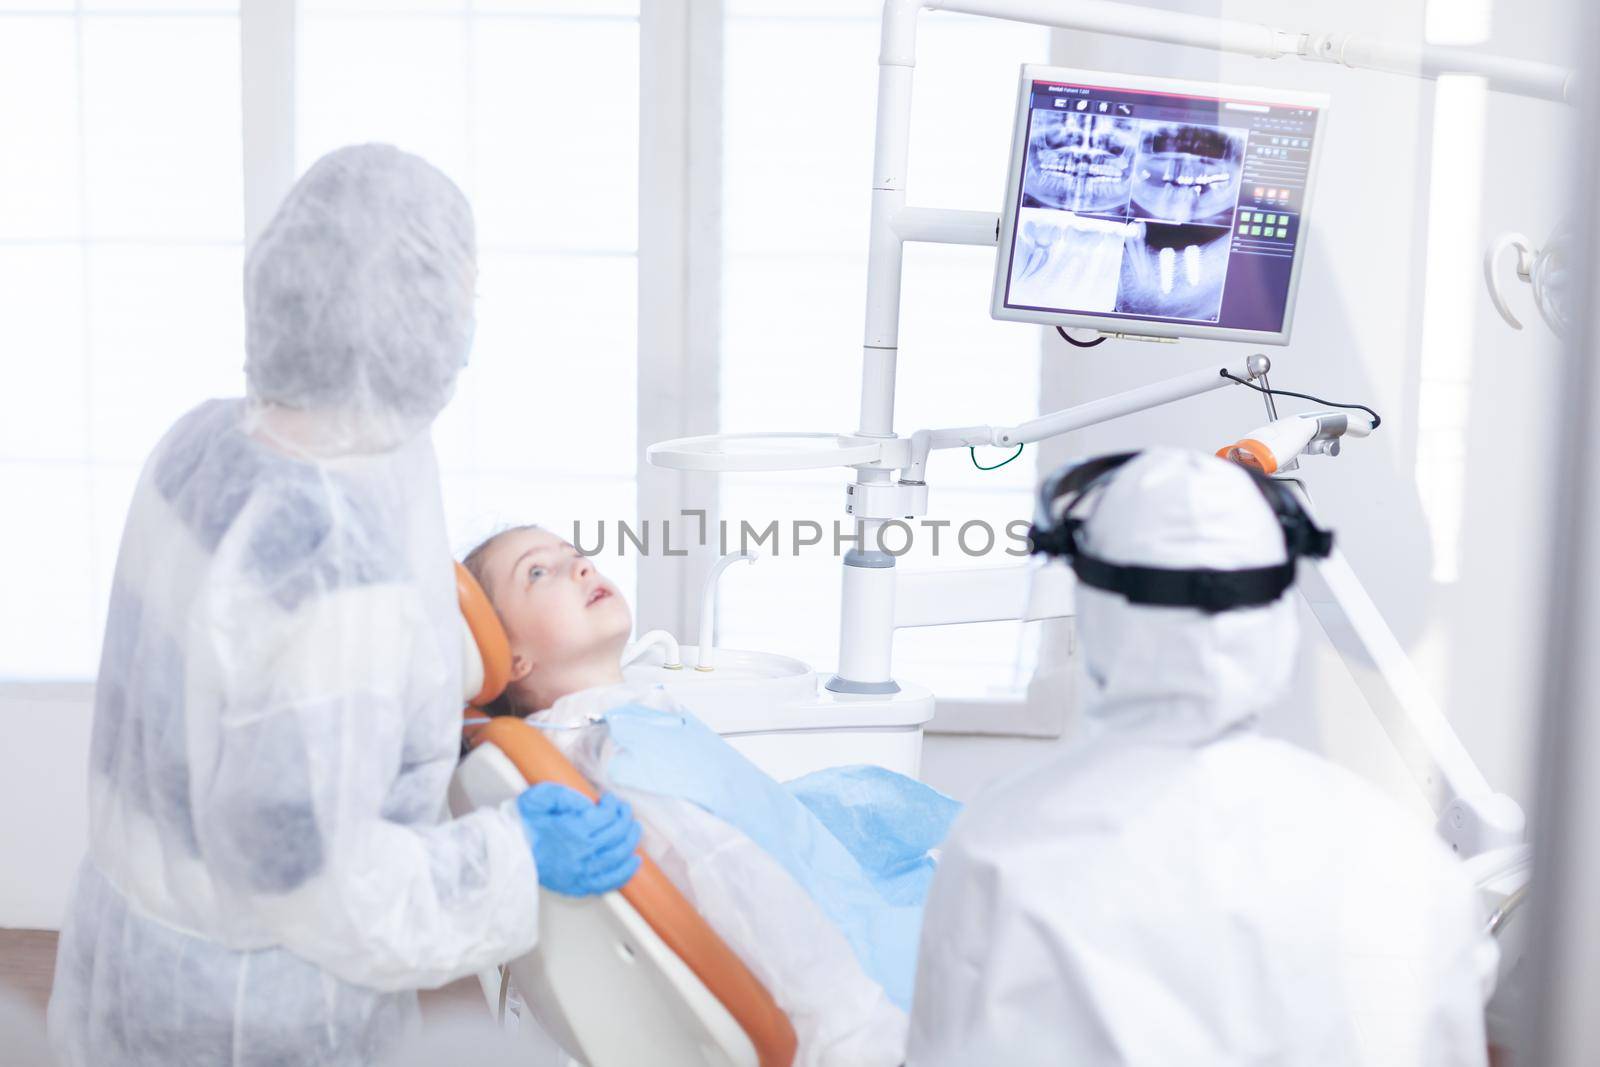 Little girl in ppe looking at her mother in the course of dental examination. Stomatolog in protectie suit for coroanvirus as safety precaution looking at digital child teeth x-ray during consultation.